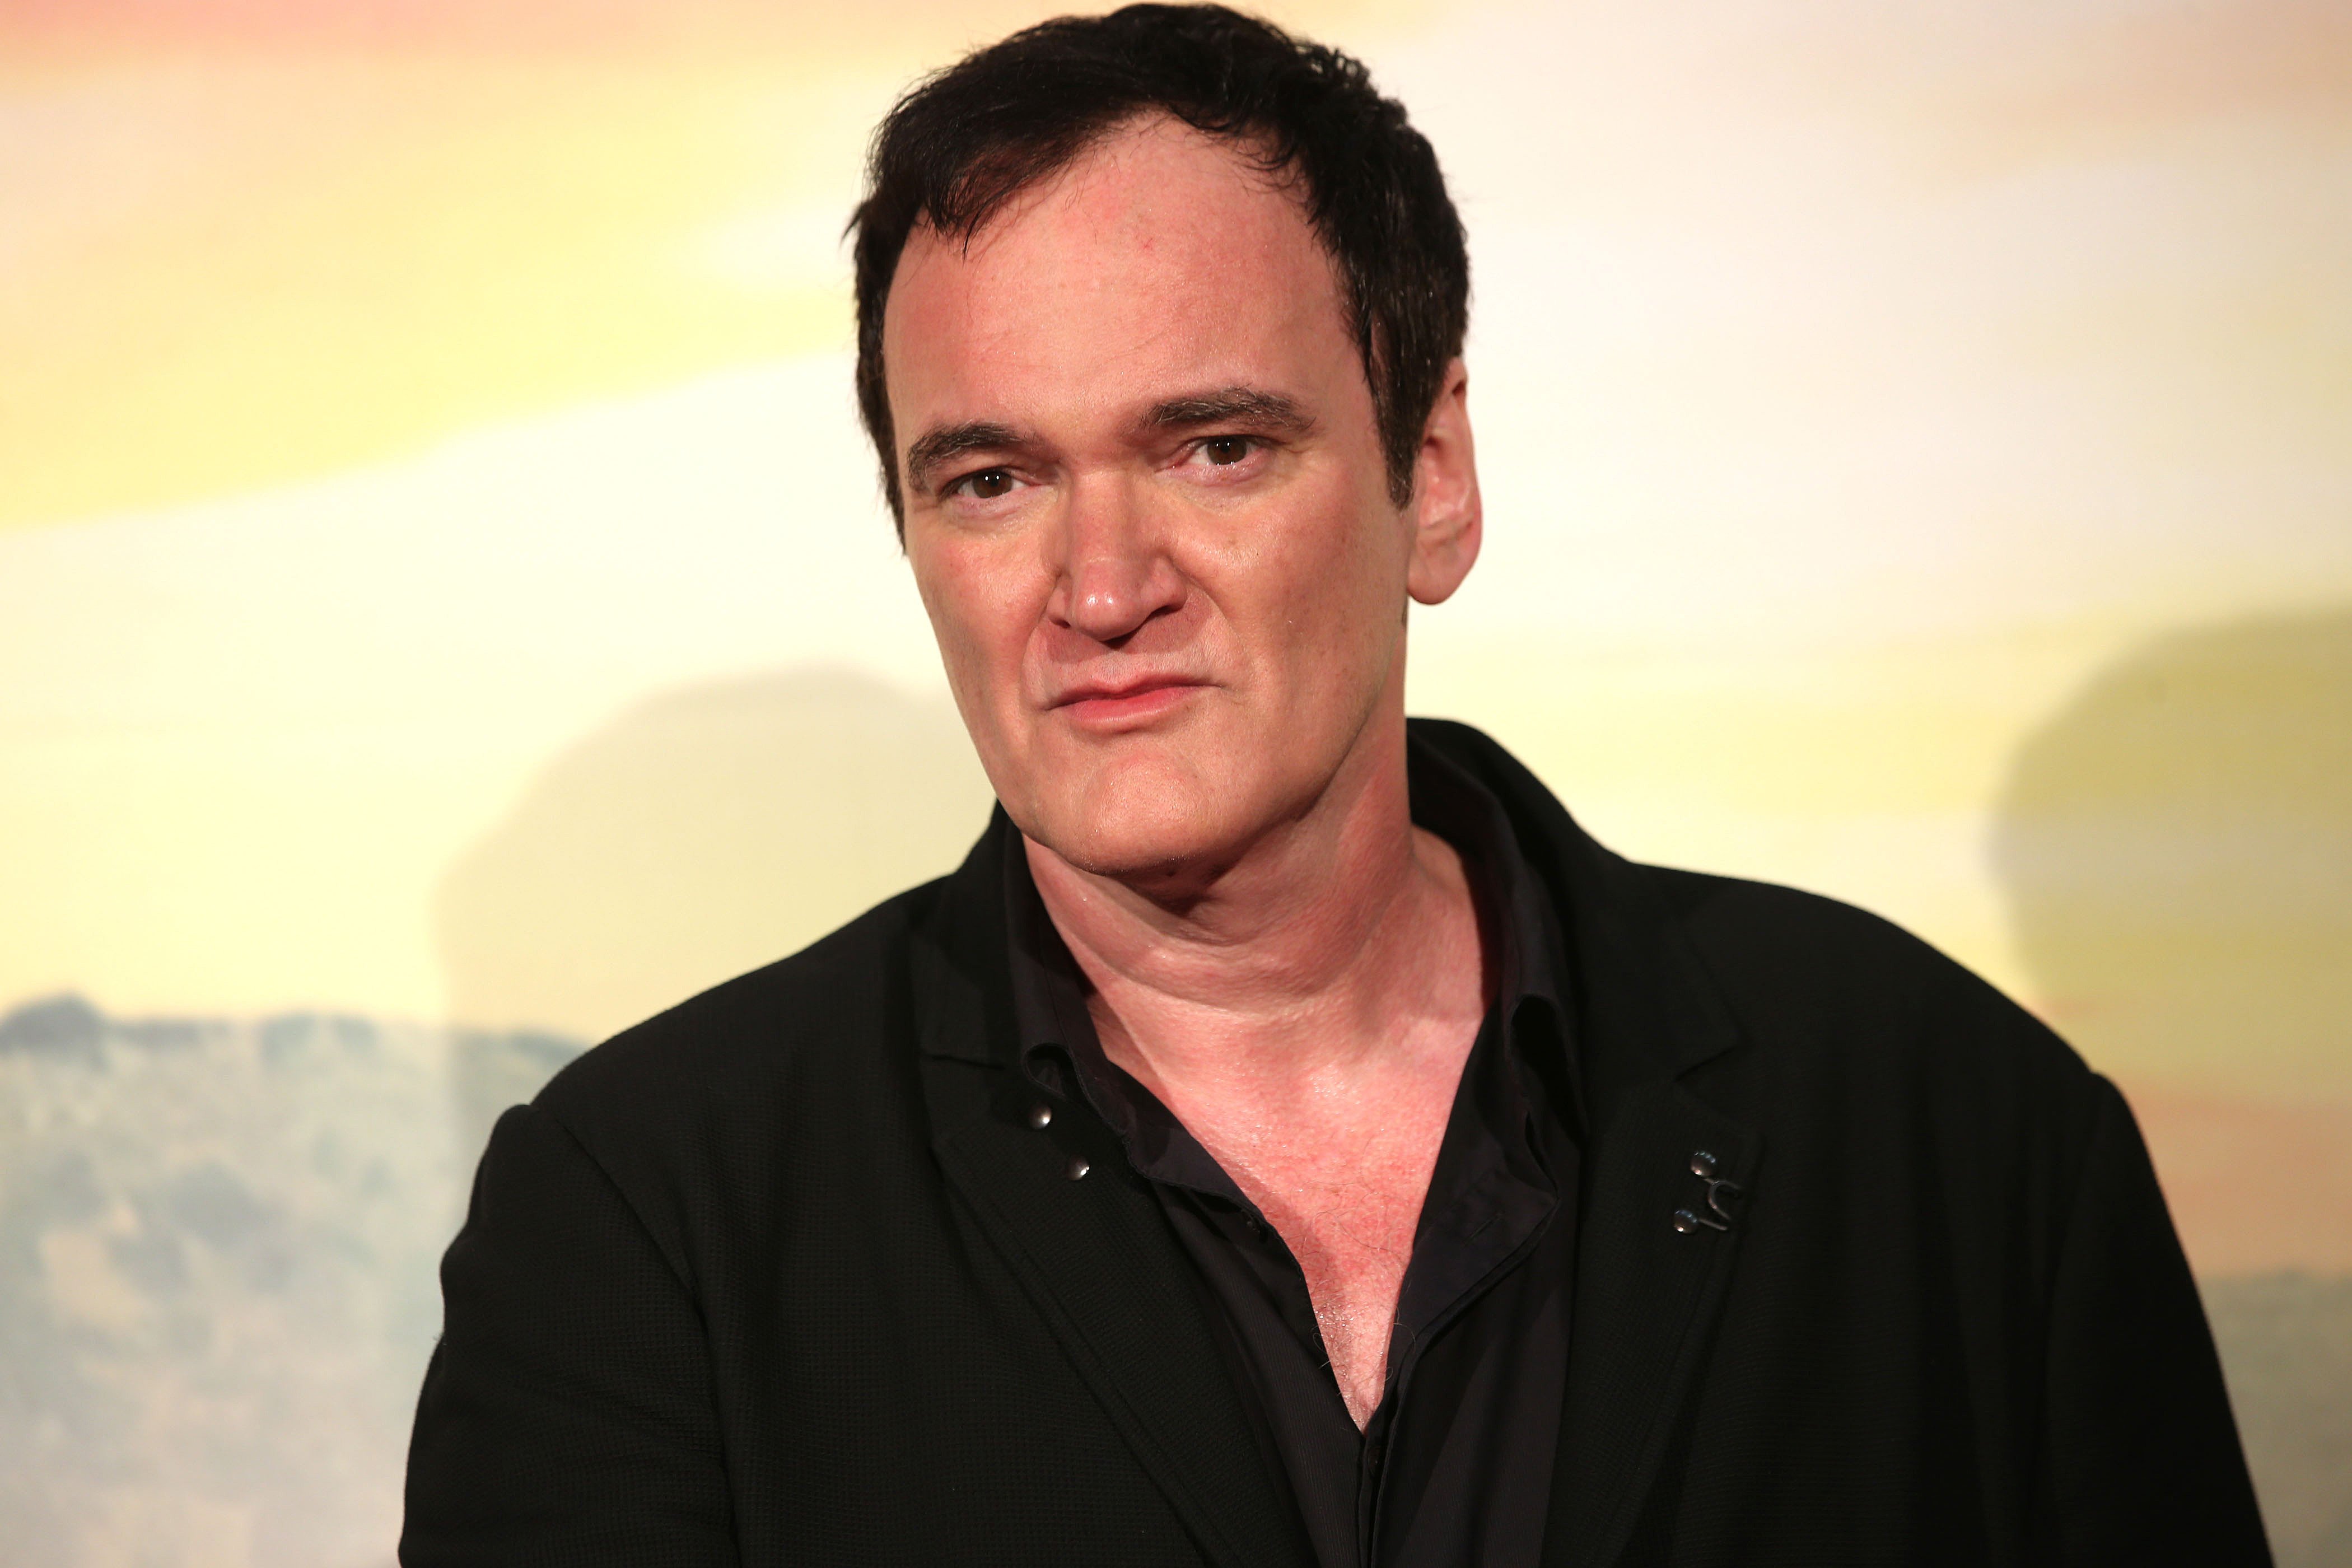 Quentin Tarantino at the premiere of the movie "Once Upon a time in Hollywood" at Cinema Adriano in Rome, Italy | Photo: Franco Origlia/Getty Images